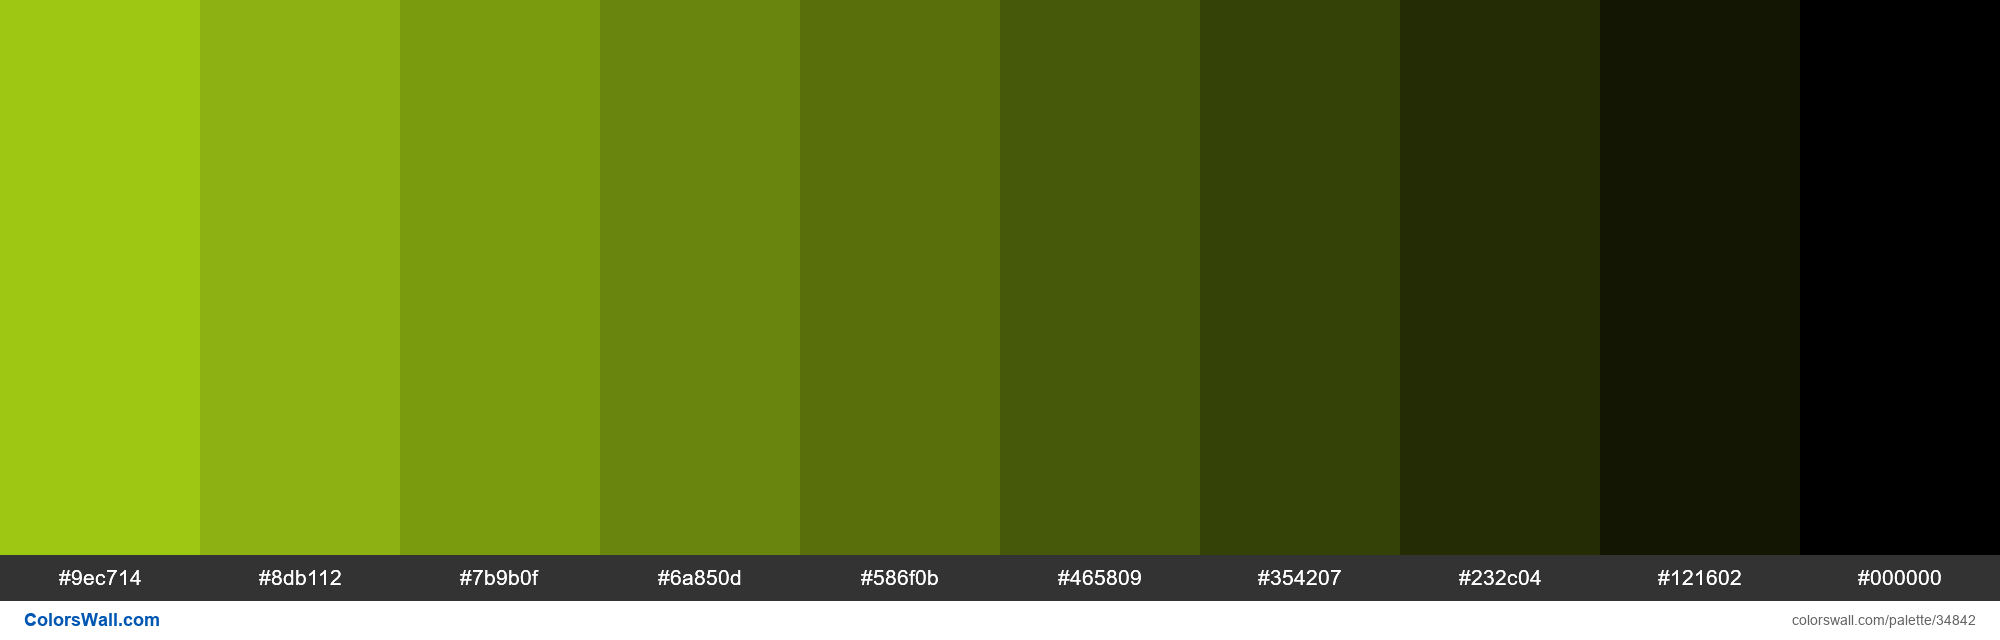 Shades XKCD Color yellowish green #b0dd16 hex colors palette - ColorsWall